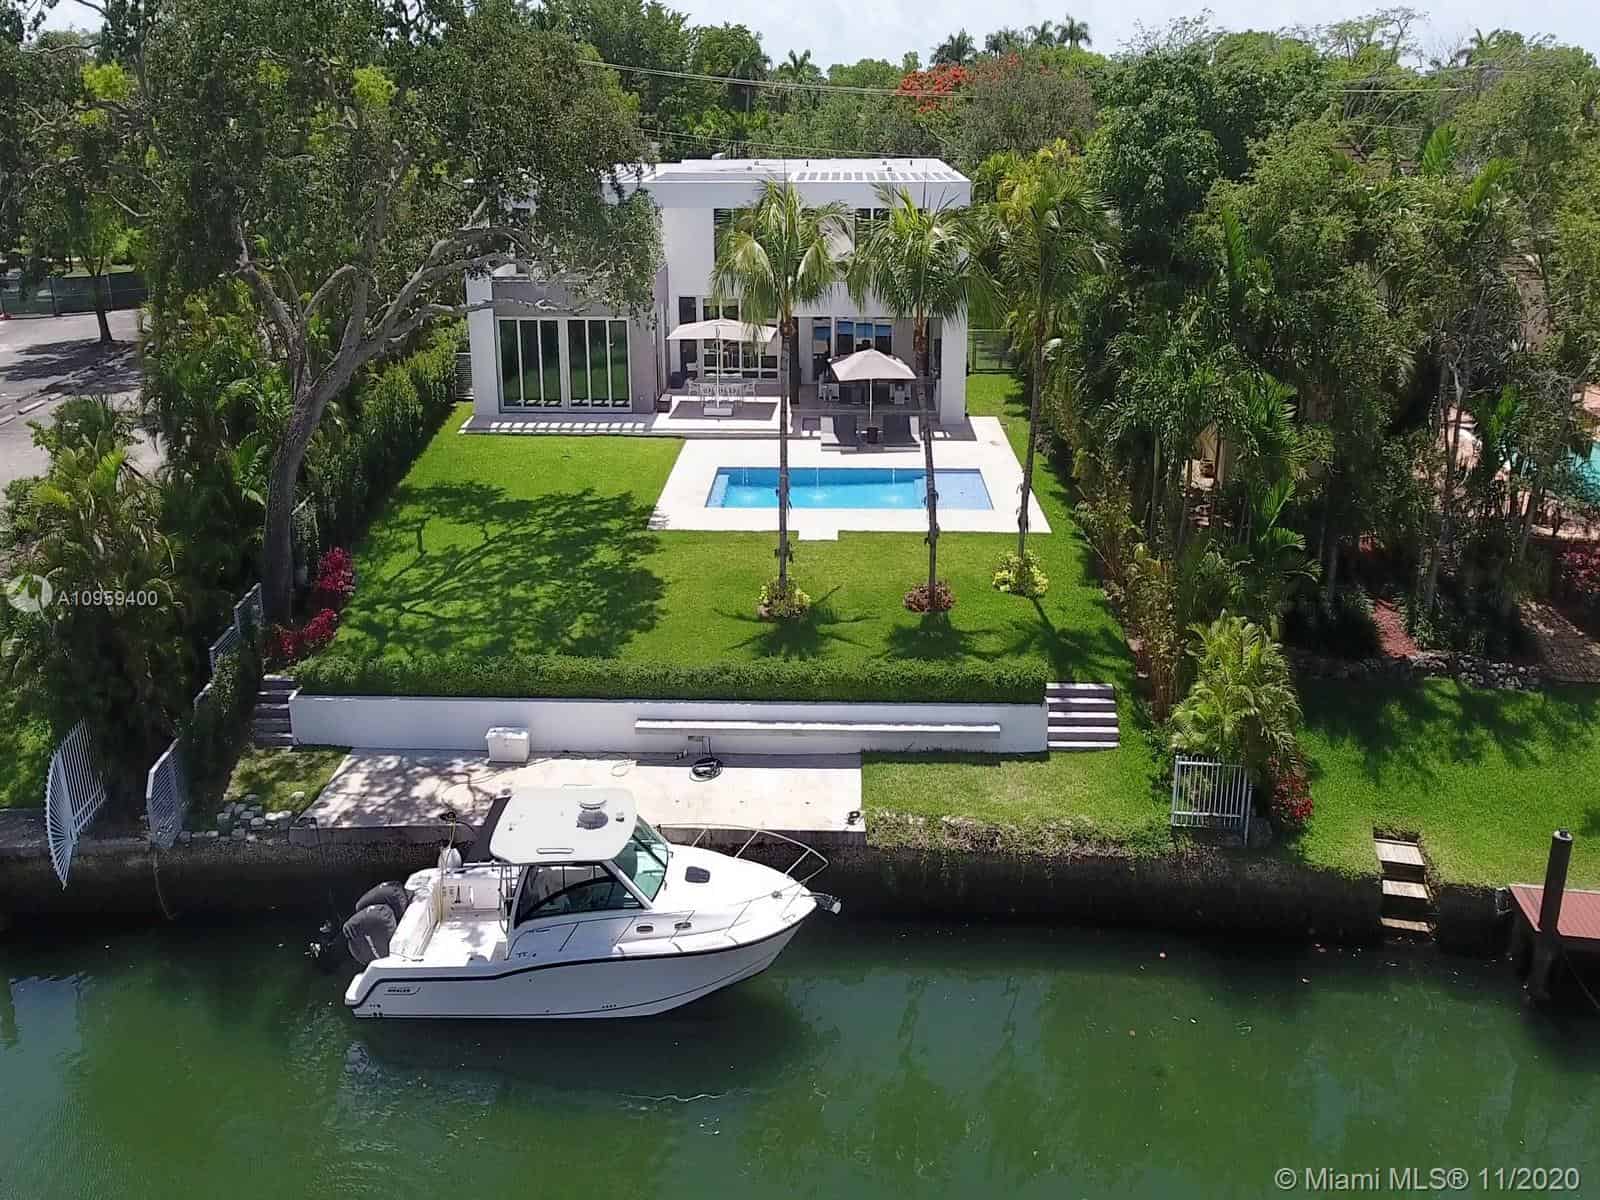 6300 CABALLERO BL, CORAL GABLES: Ultra-Luxury Homes for Sale in Coral Gables